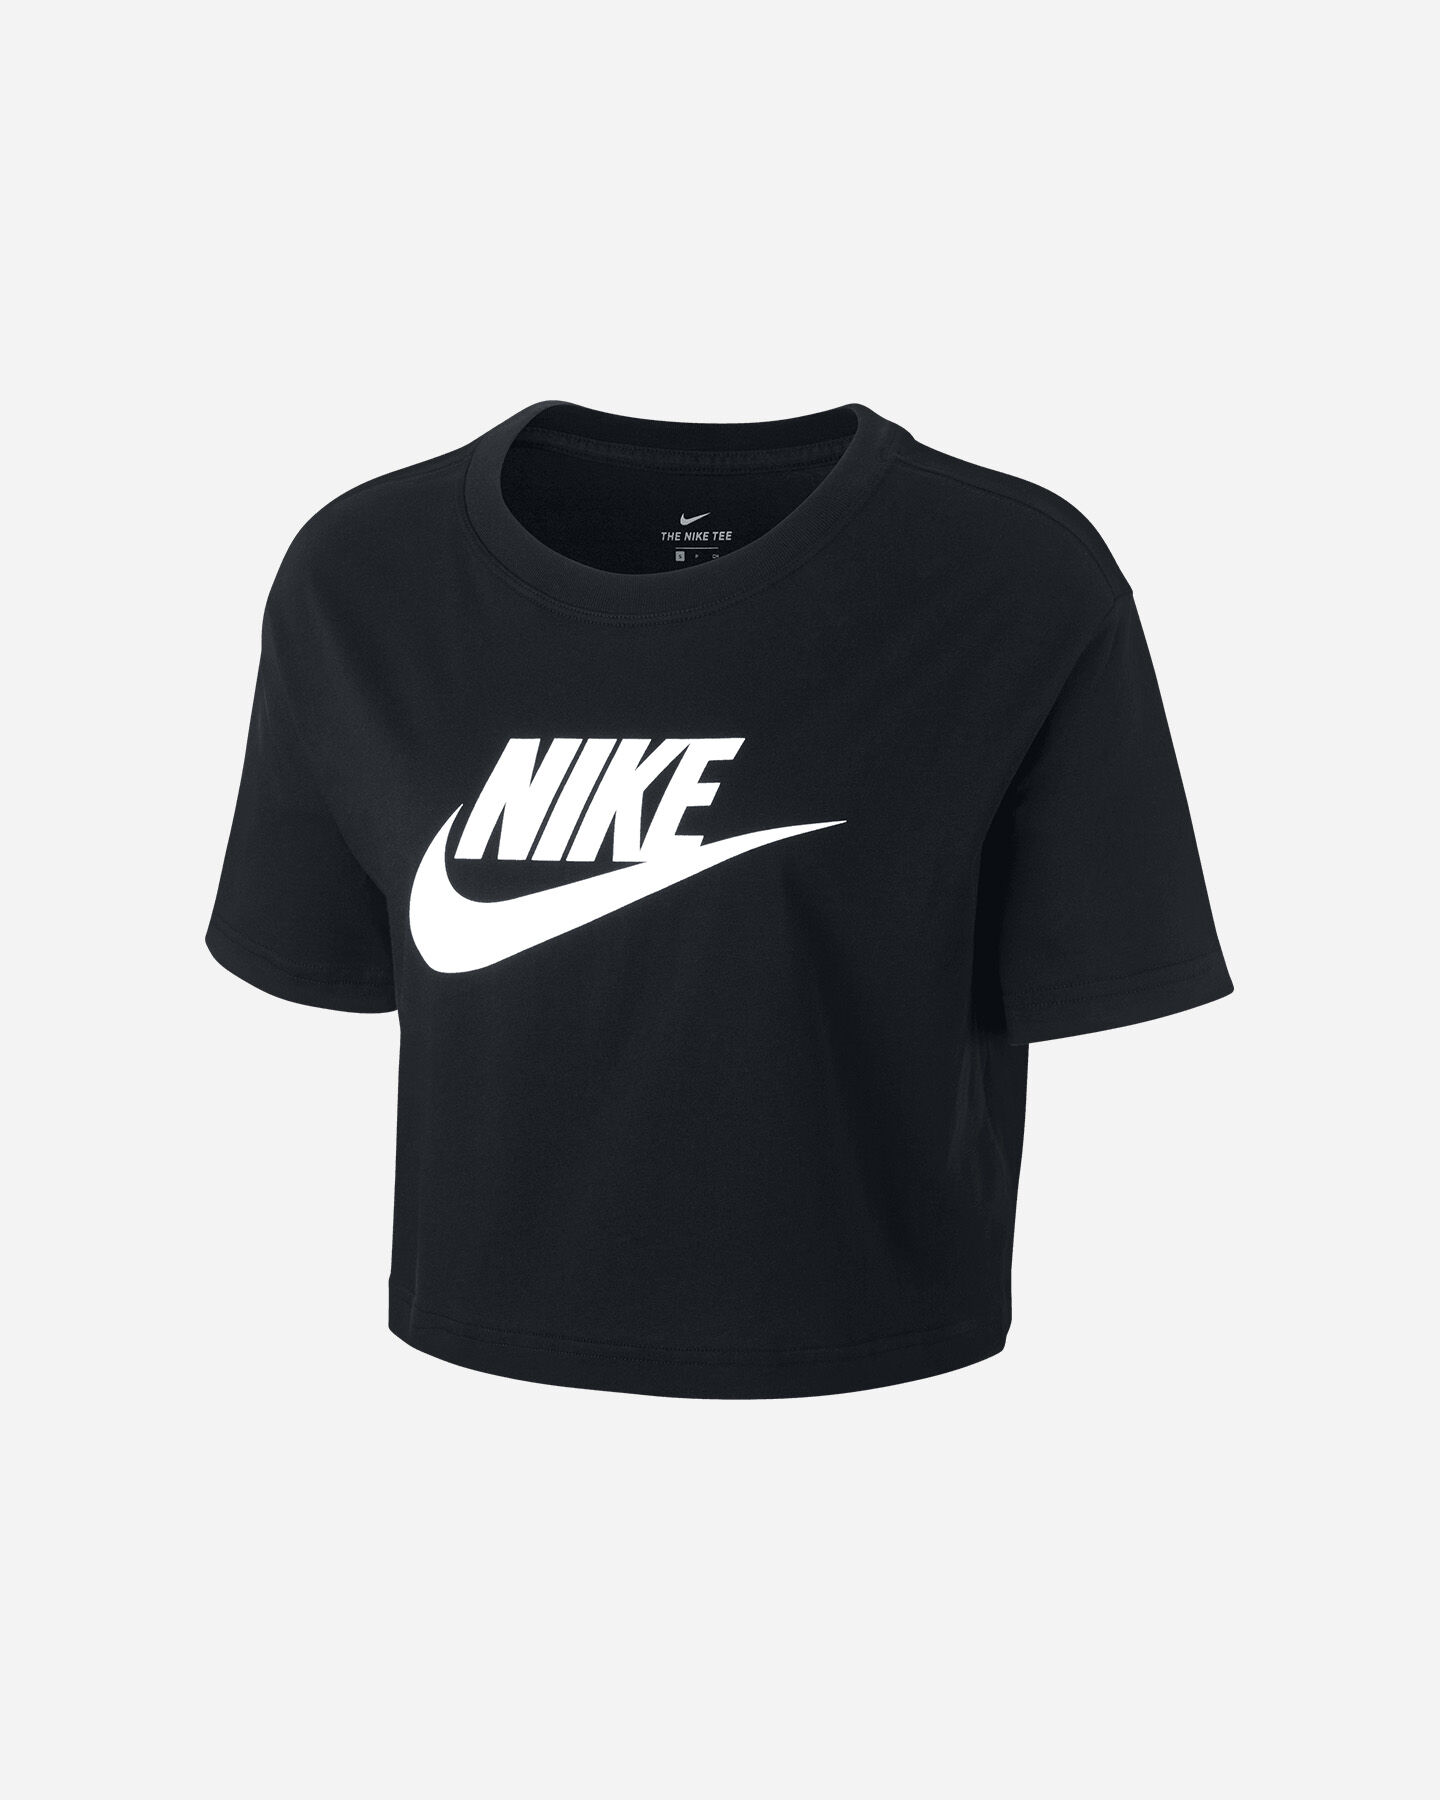  T-Shirt NIKE ESSENTIAL W S2024313|010|M scatto 0